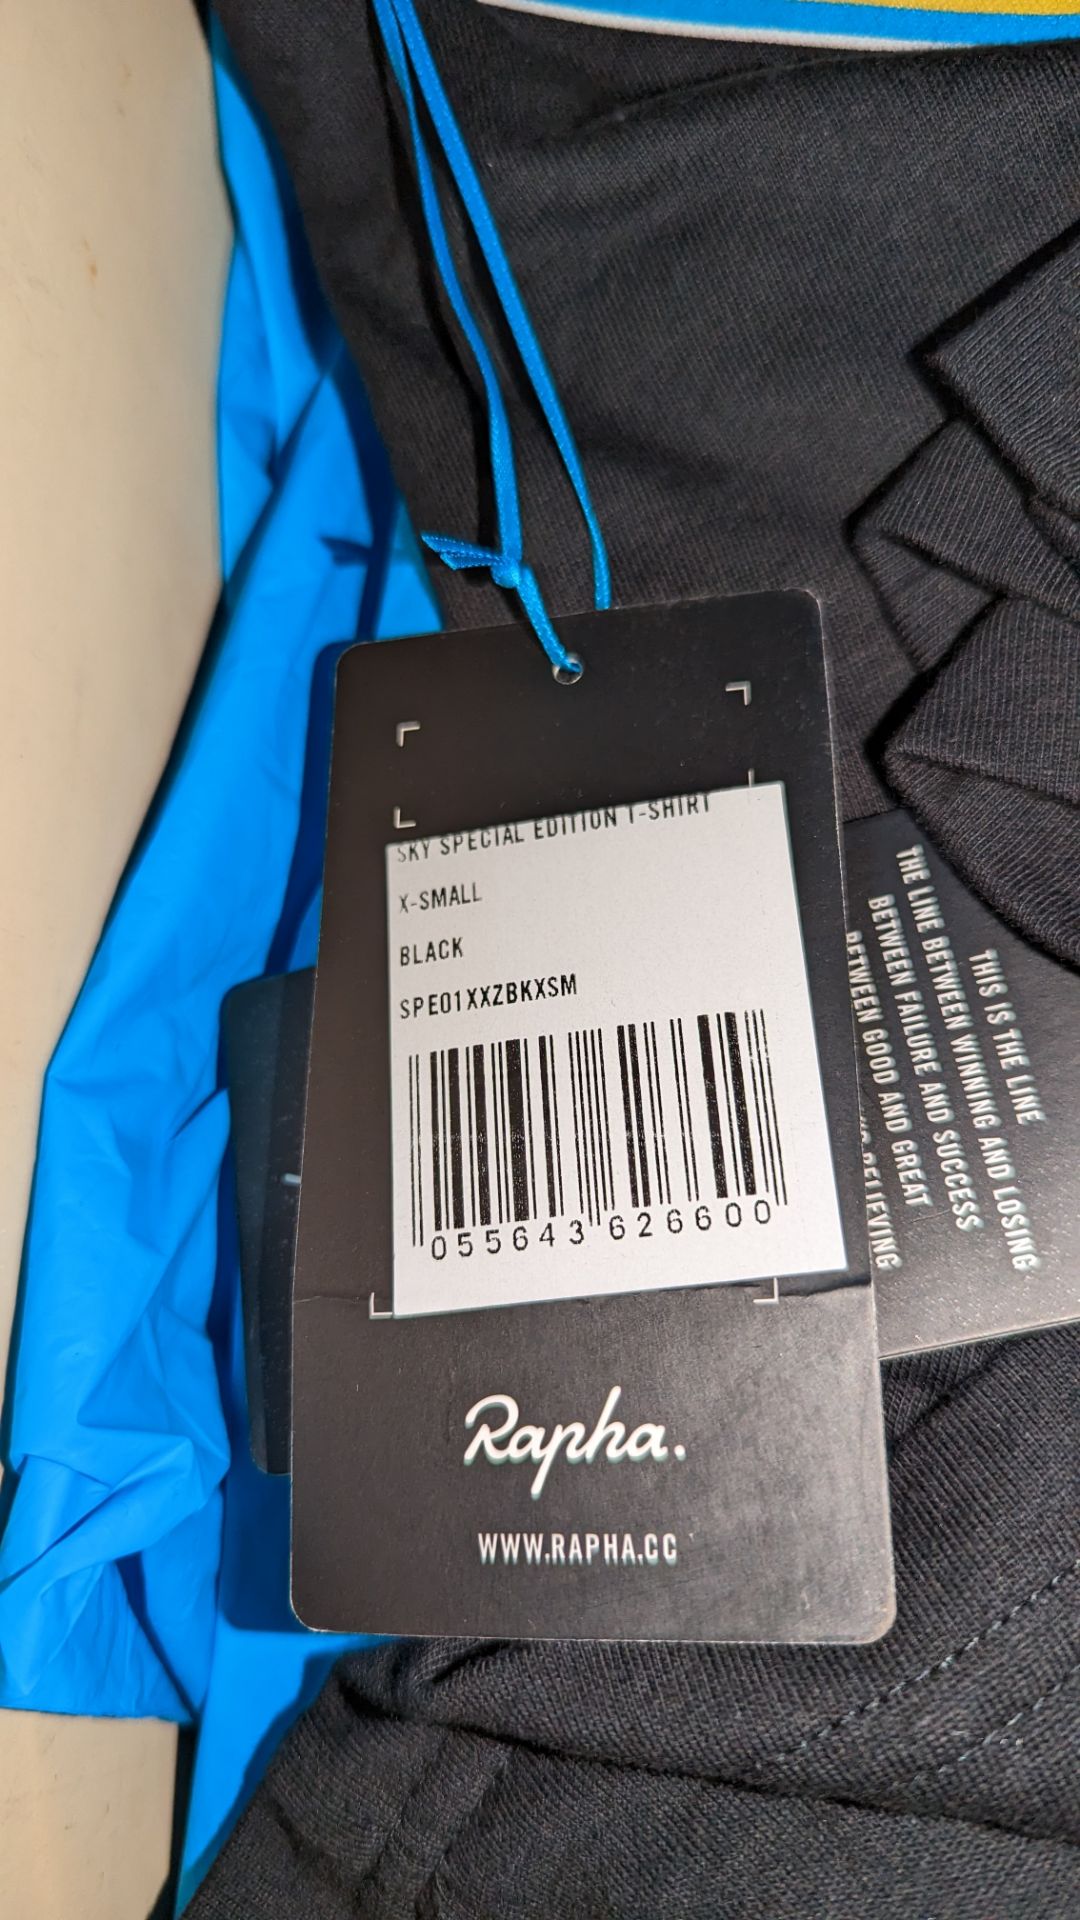 10 Rapha Cycling Sky special edition ladies t-shirts, most of which appear to be in size XS - crate - Image 5 of 5